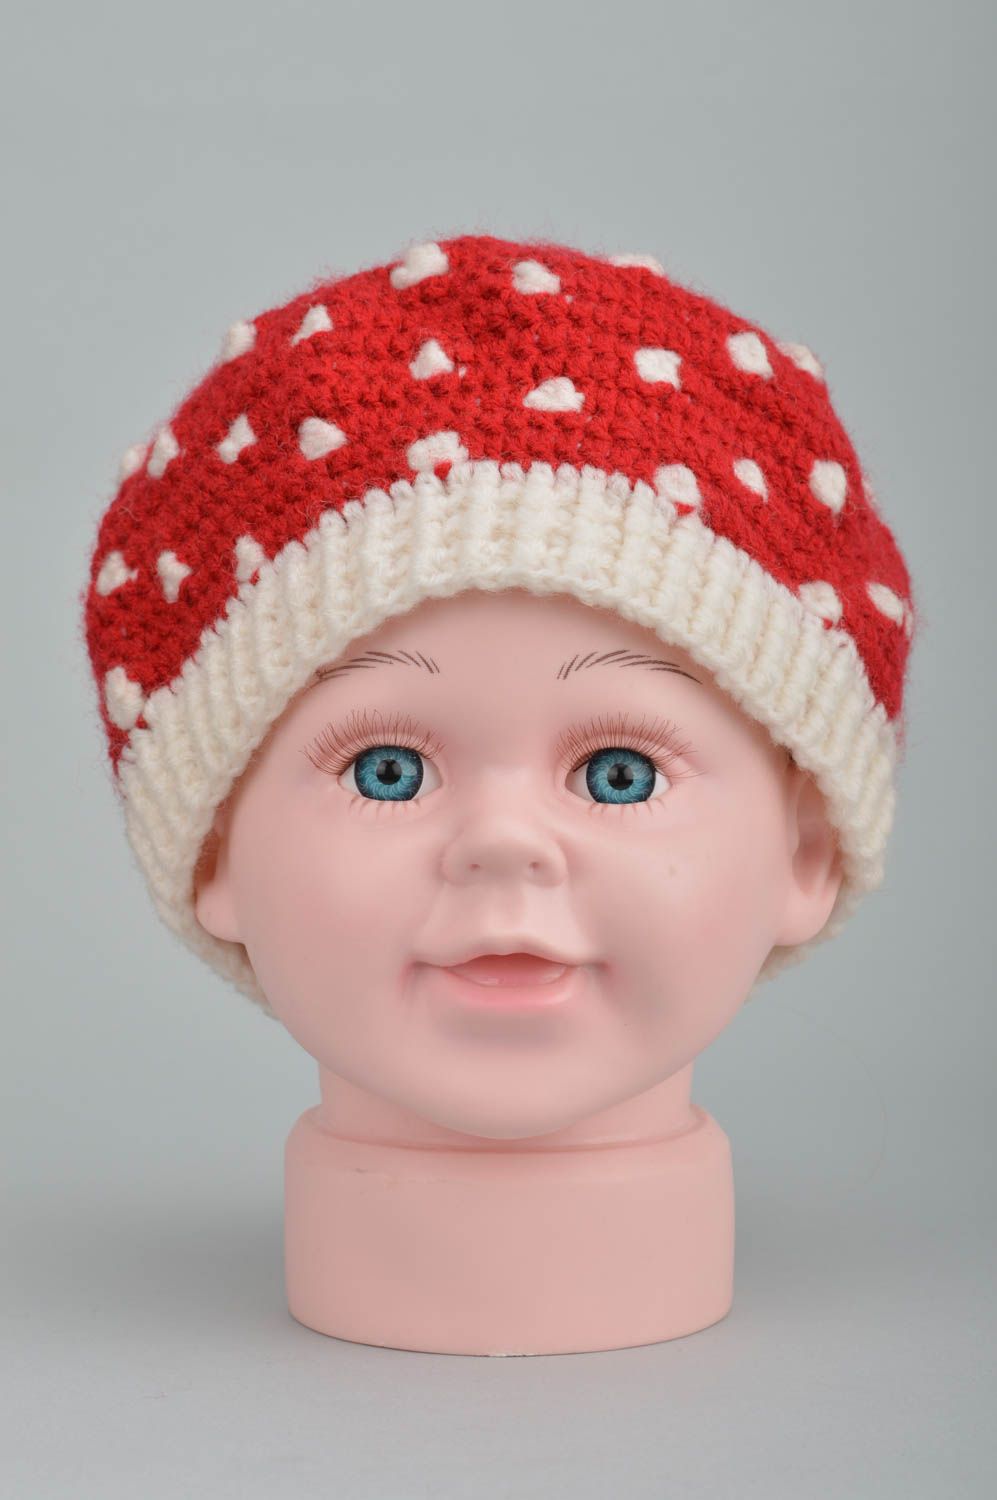 Handmade cute woven cap red strawberry cap beautiful accessories for kids photo 3